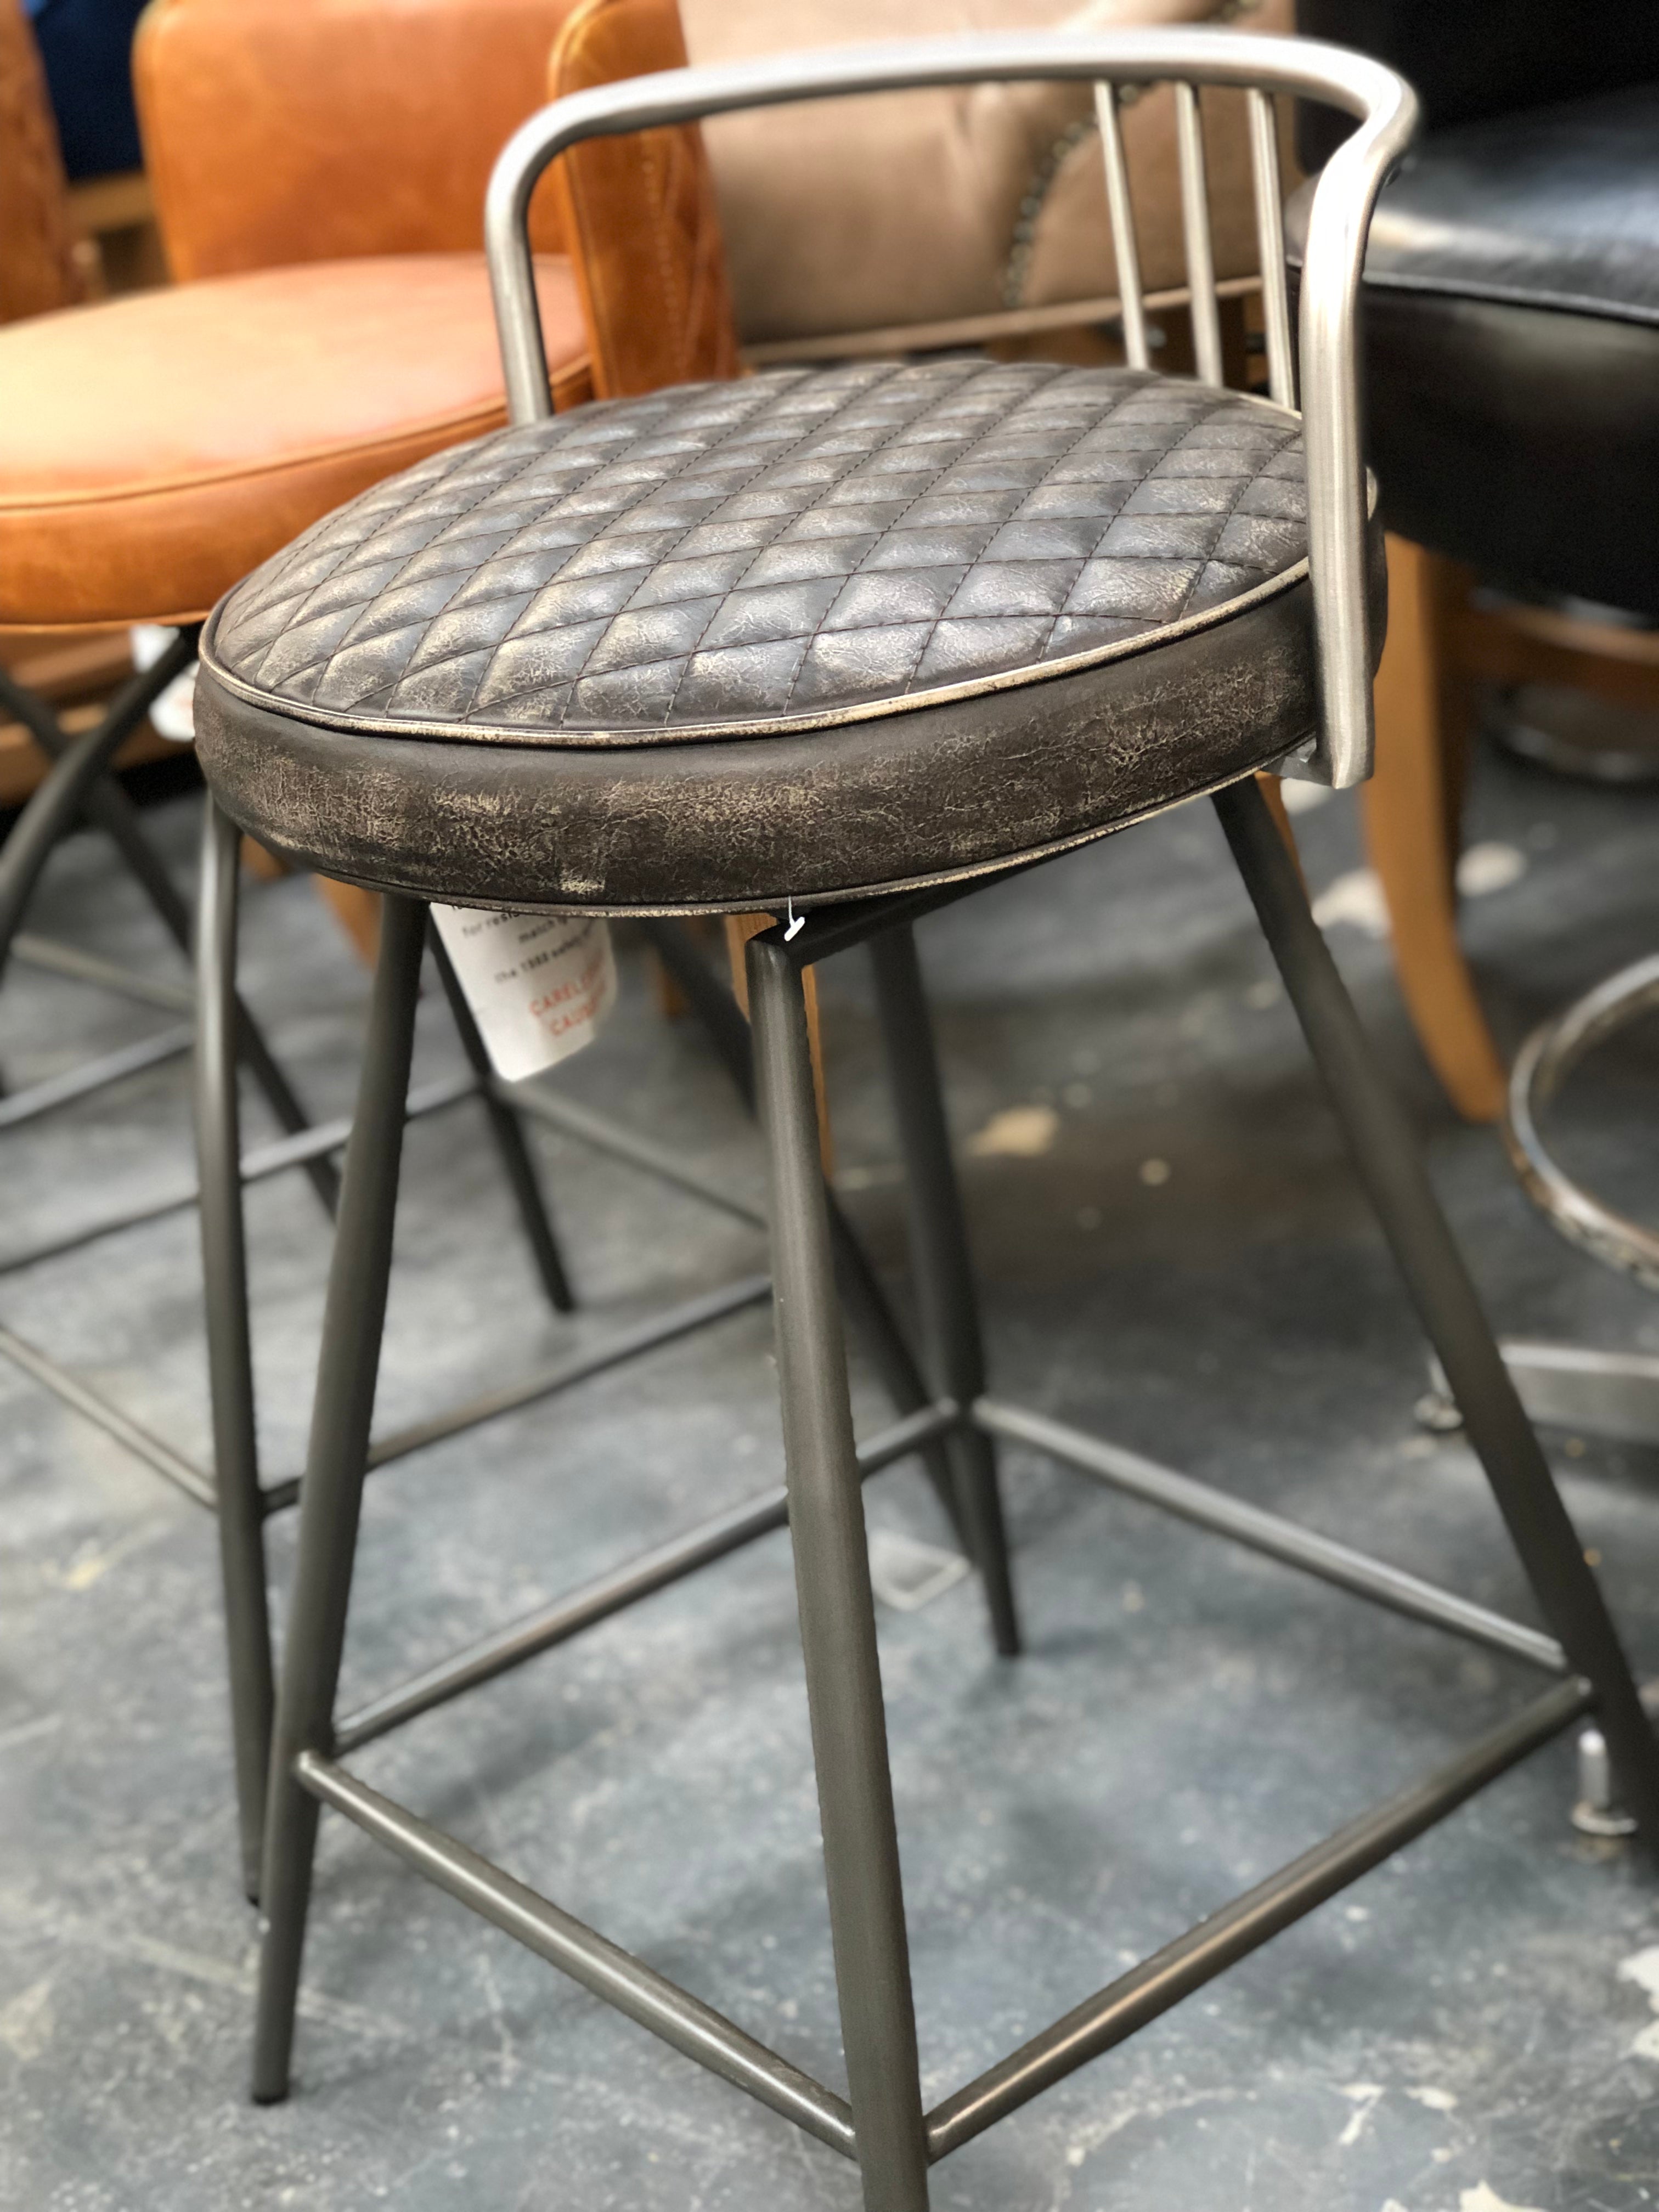 Mason high back bar stool available from Top Secret Furniture